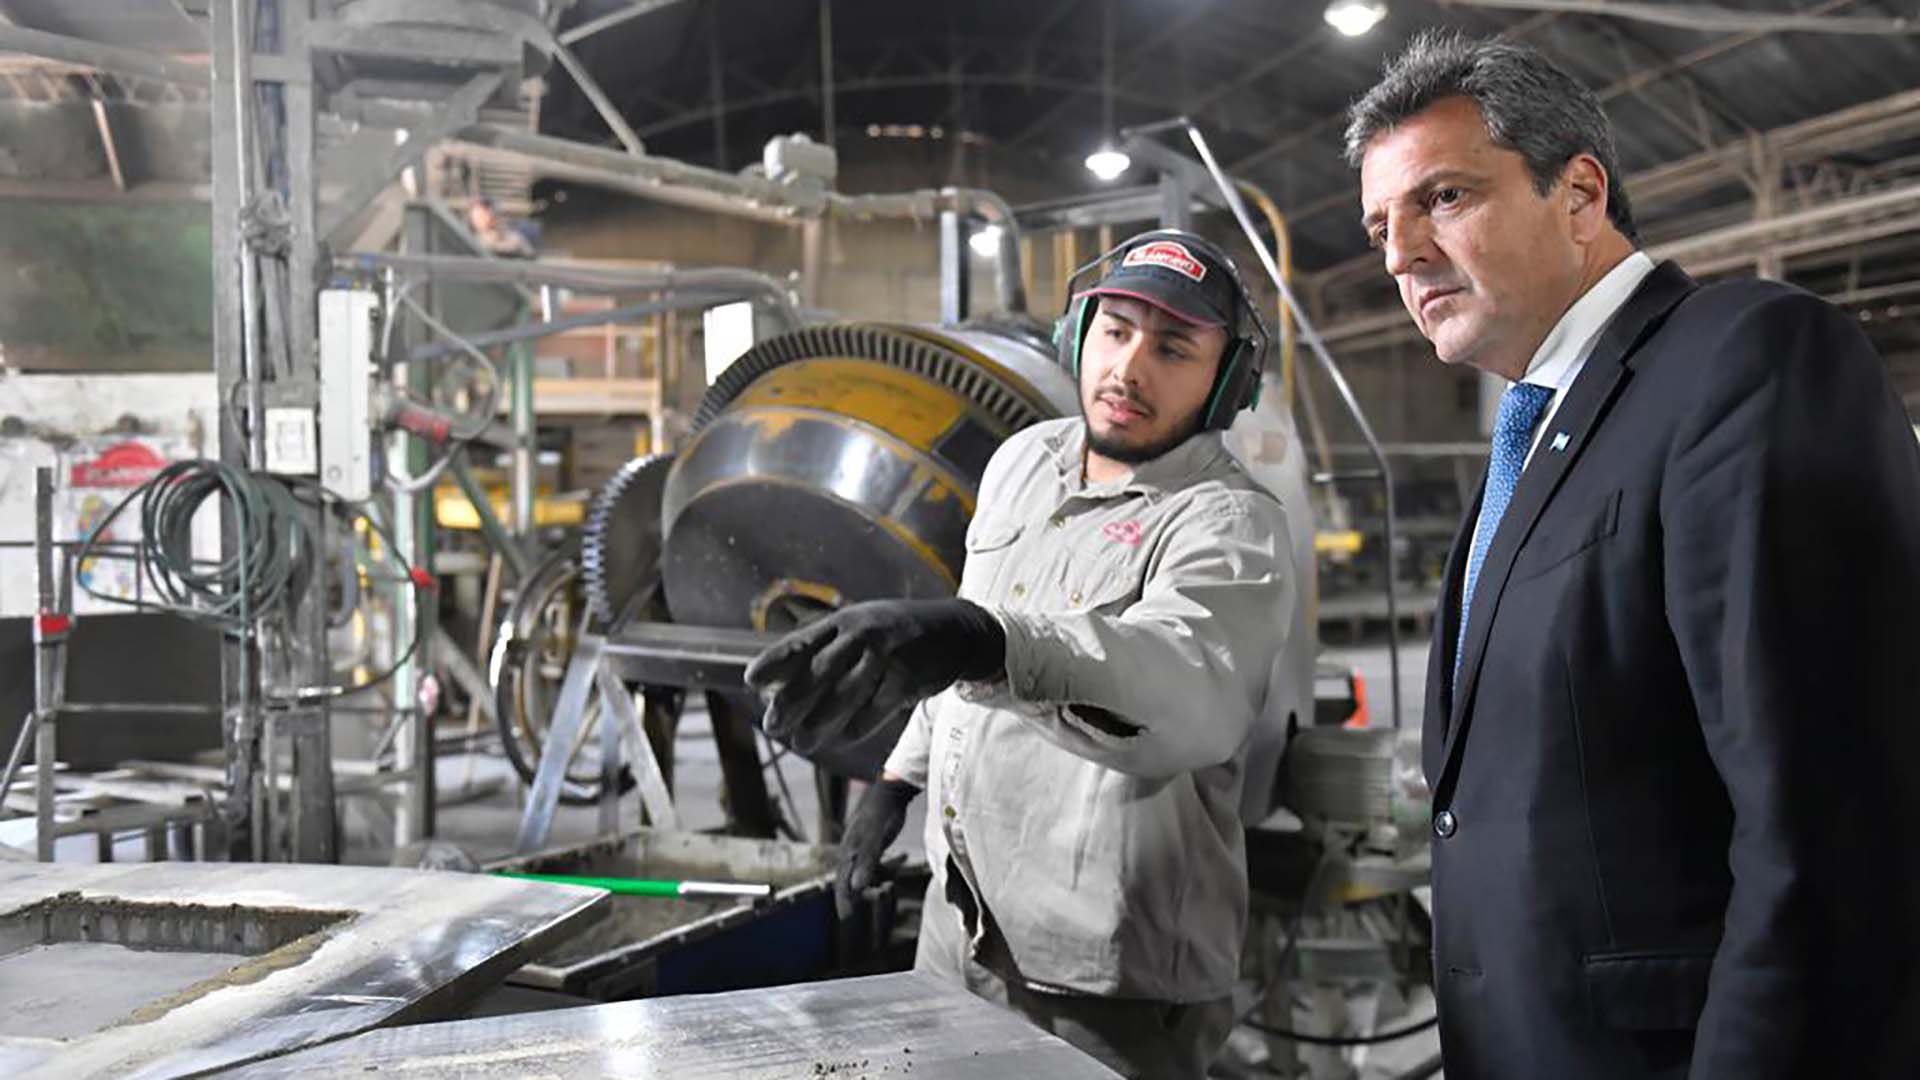 Massa, in one of the companies he visited on his itinerary as Economy Minister and presidential candidate